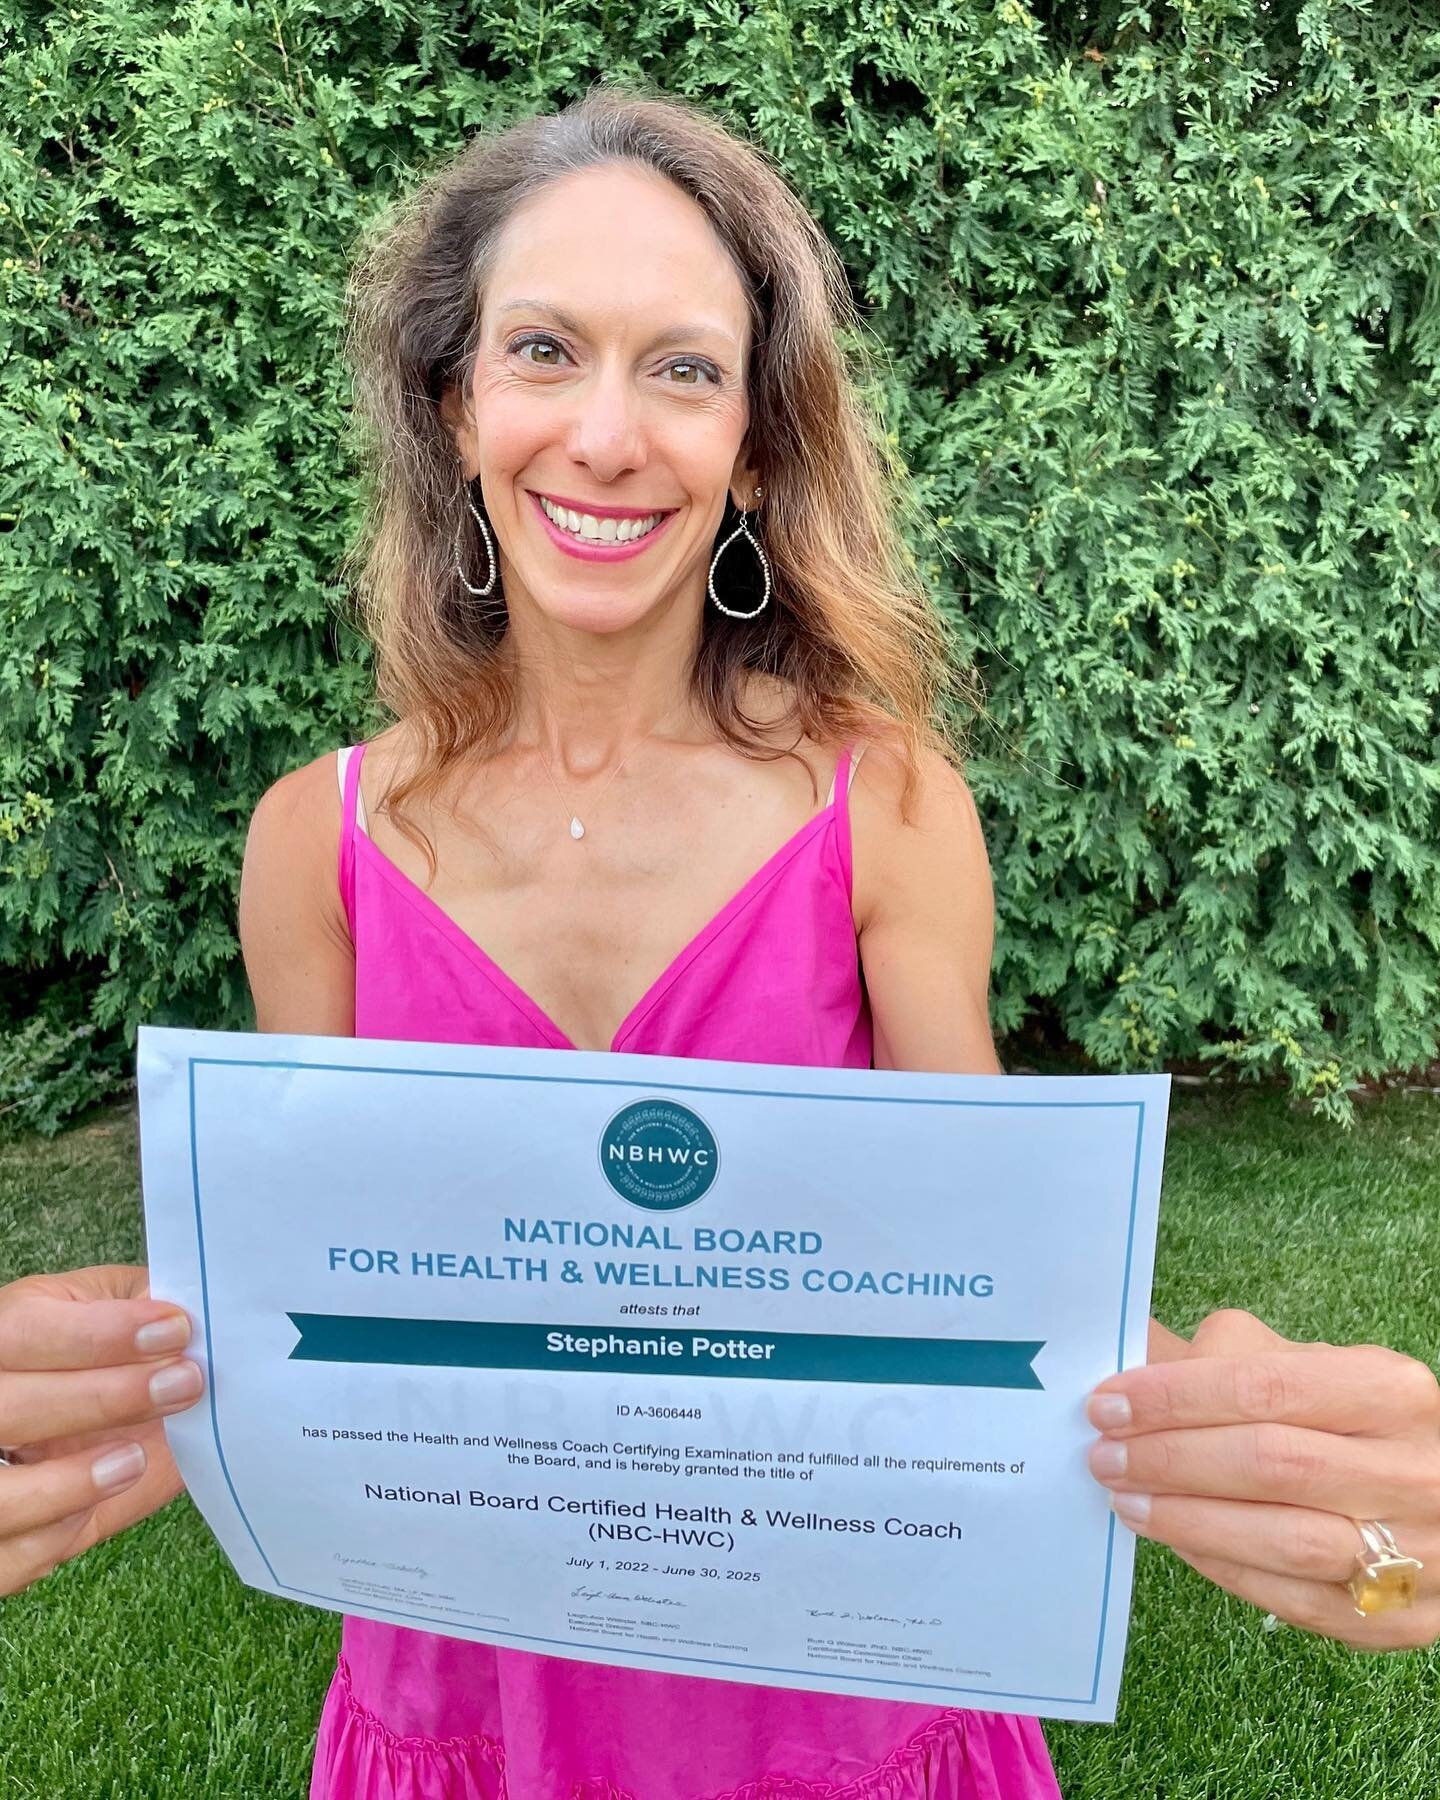 I did it!  I am officially a National Board Certified Health &amp; Wellness coach #nbhwcboardcertified.  When I first started on the journey to become certified I had no idea how much I would grow as a coach, after all I had been practicing as a heal